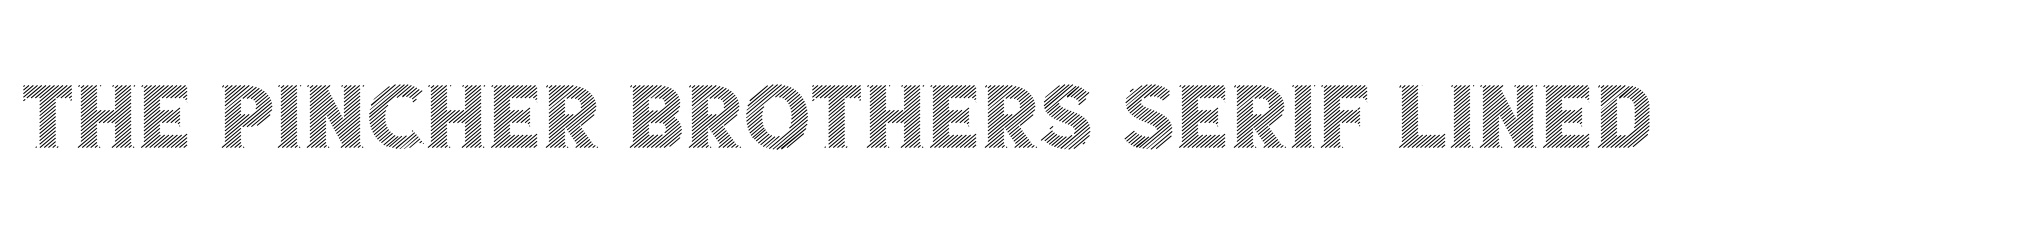 The Pincher Brothers Serif Lined image